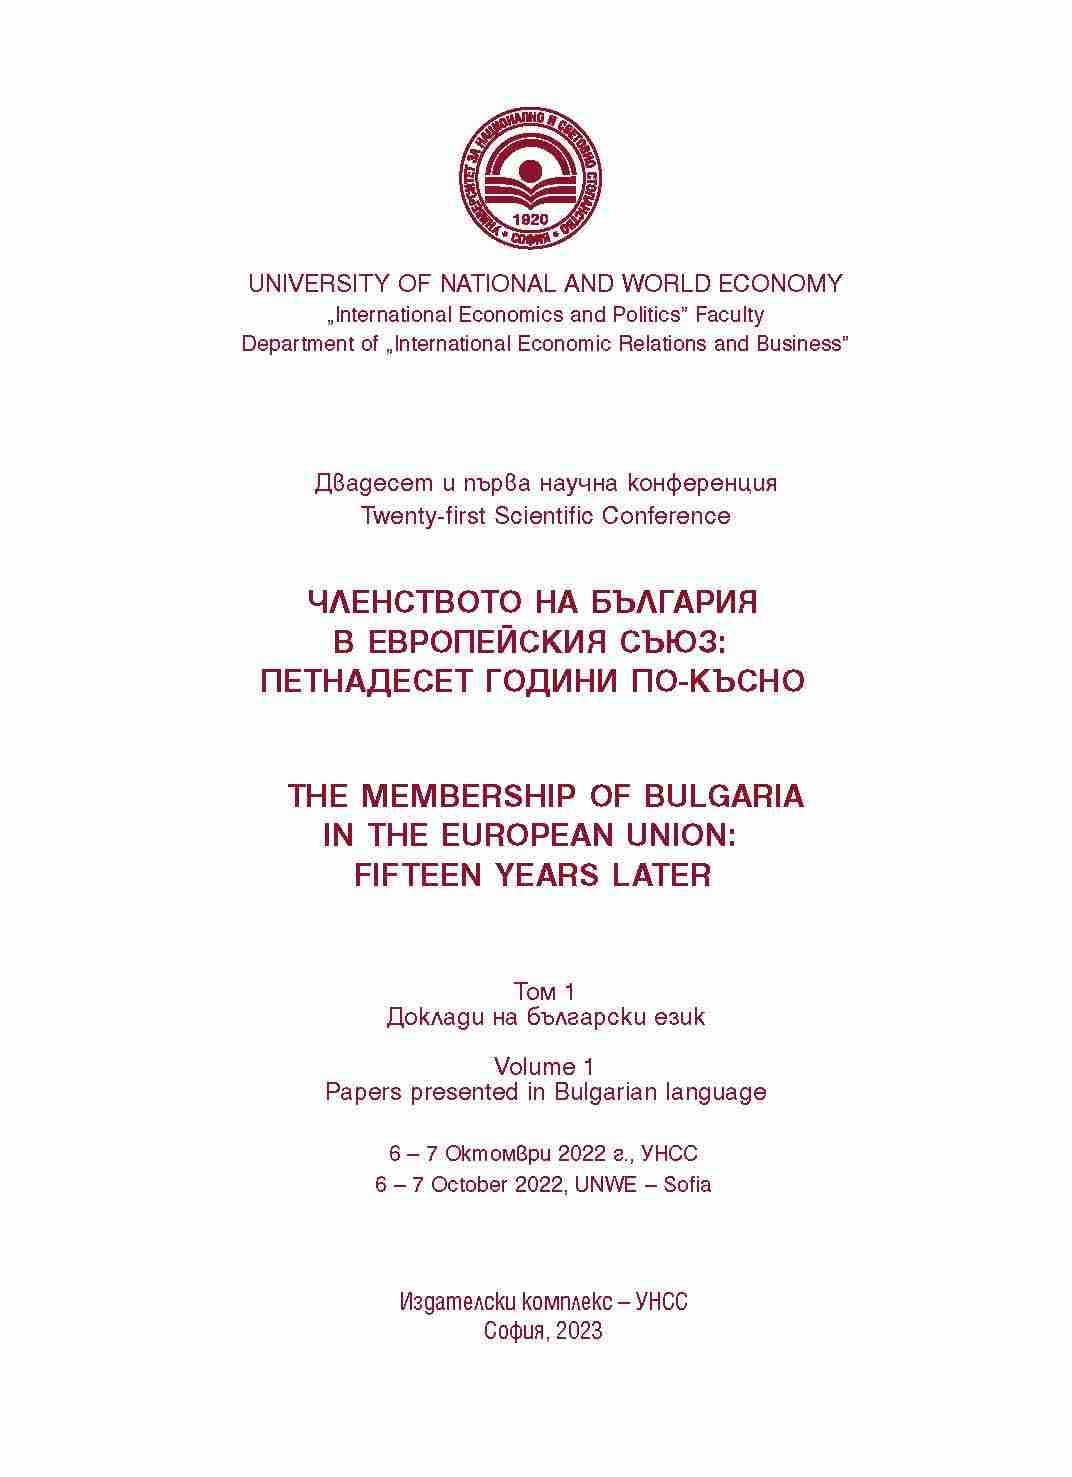 Economic Unions and Trade: Foreign Trade of Bulgaria After EU Accession